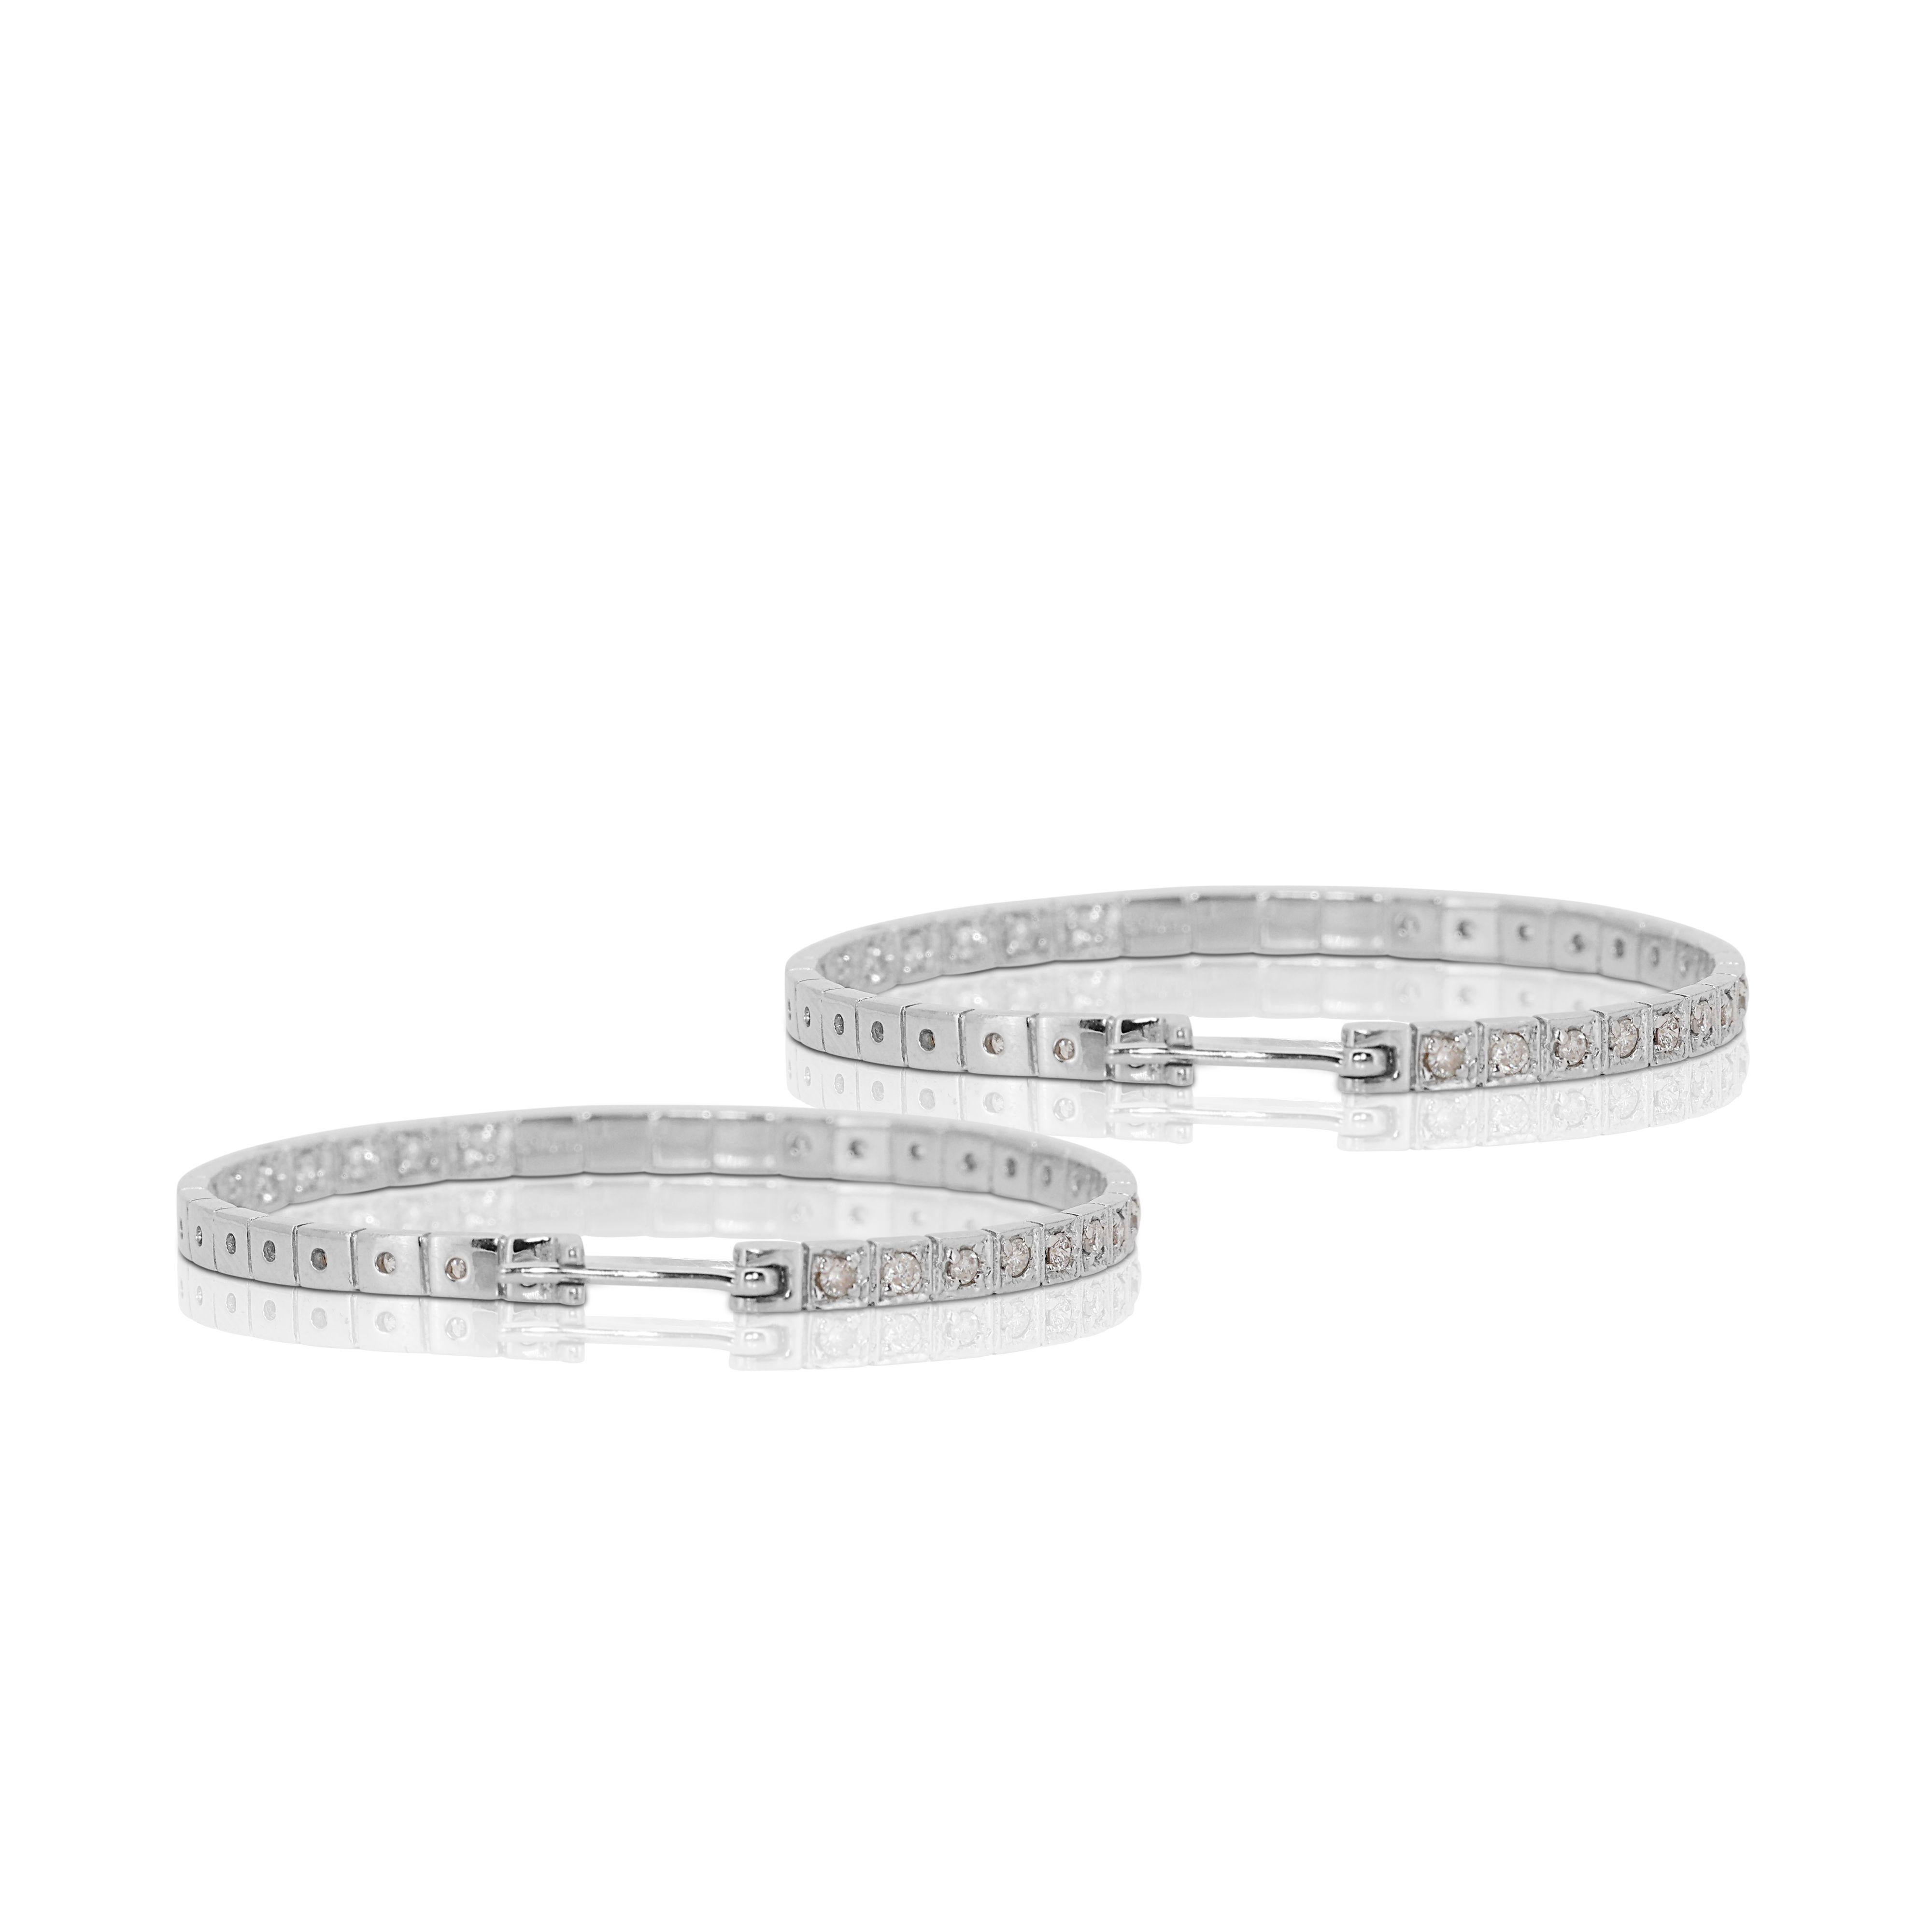 Elegant 18k White Gold Hoop Earrings with 1.36 Carat Weight of Natural Diamonds For Sale 2